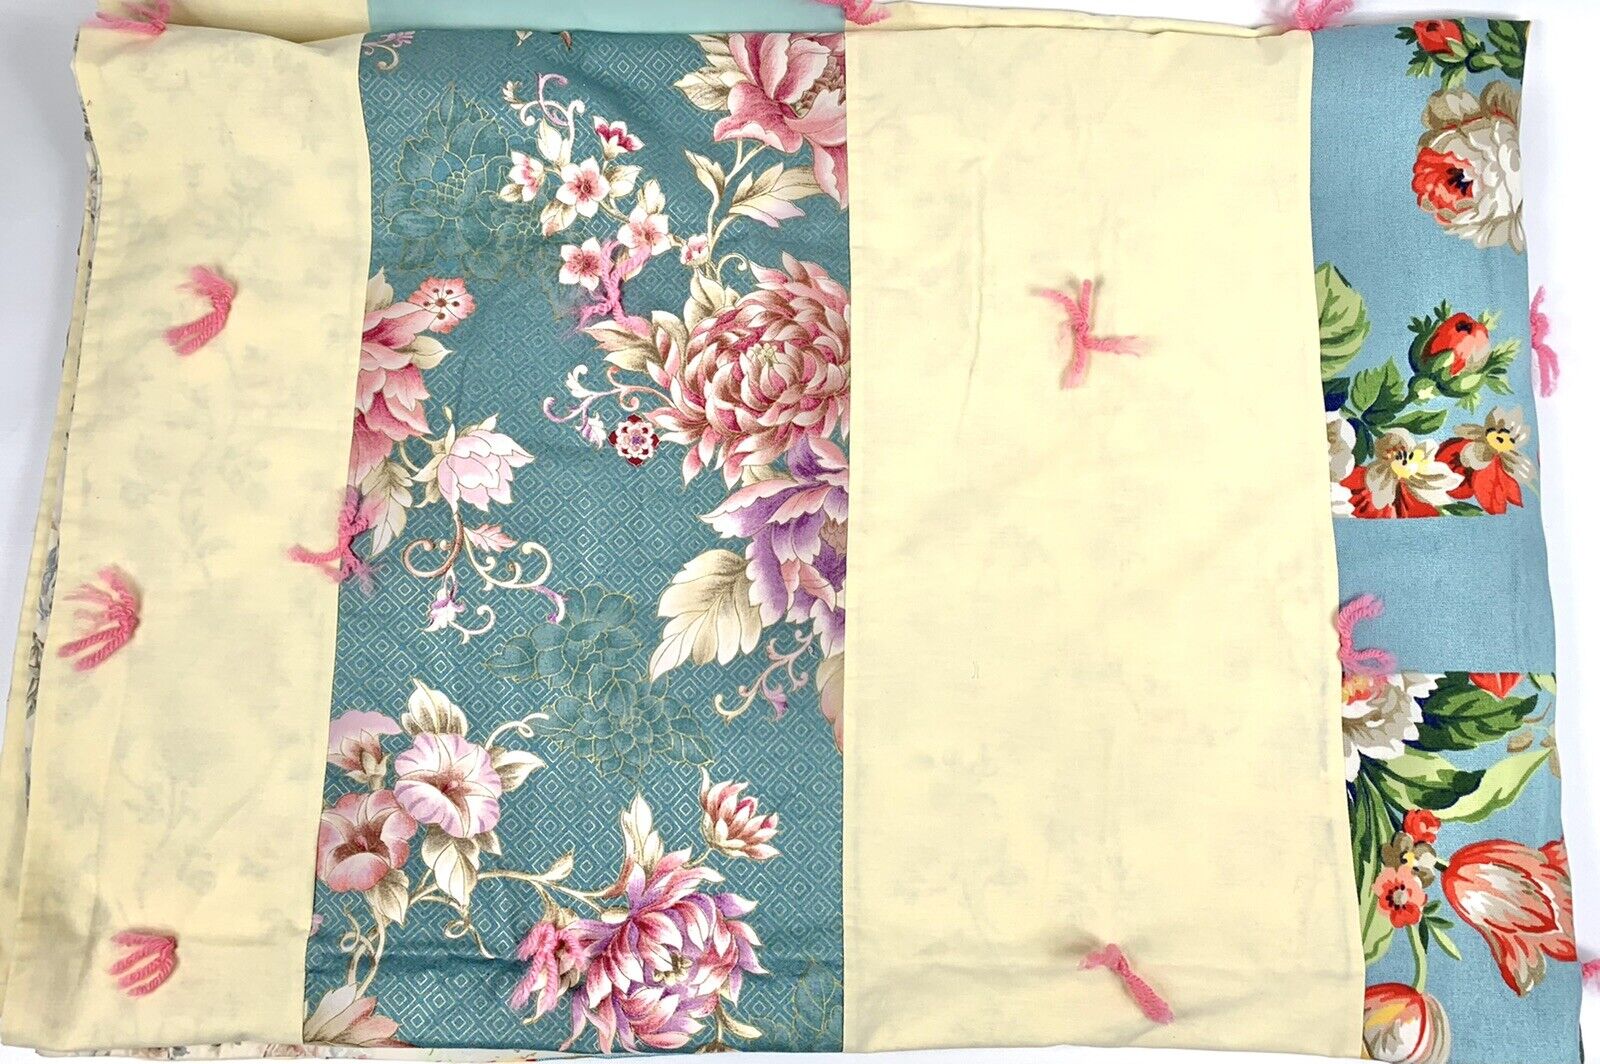 New Handmade Quilt Shabby Chic Blue Pink Floral 60”x78”